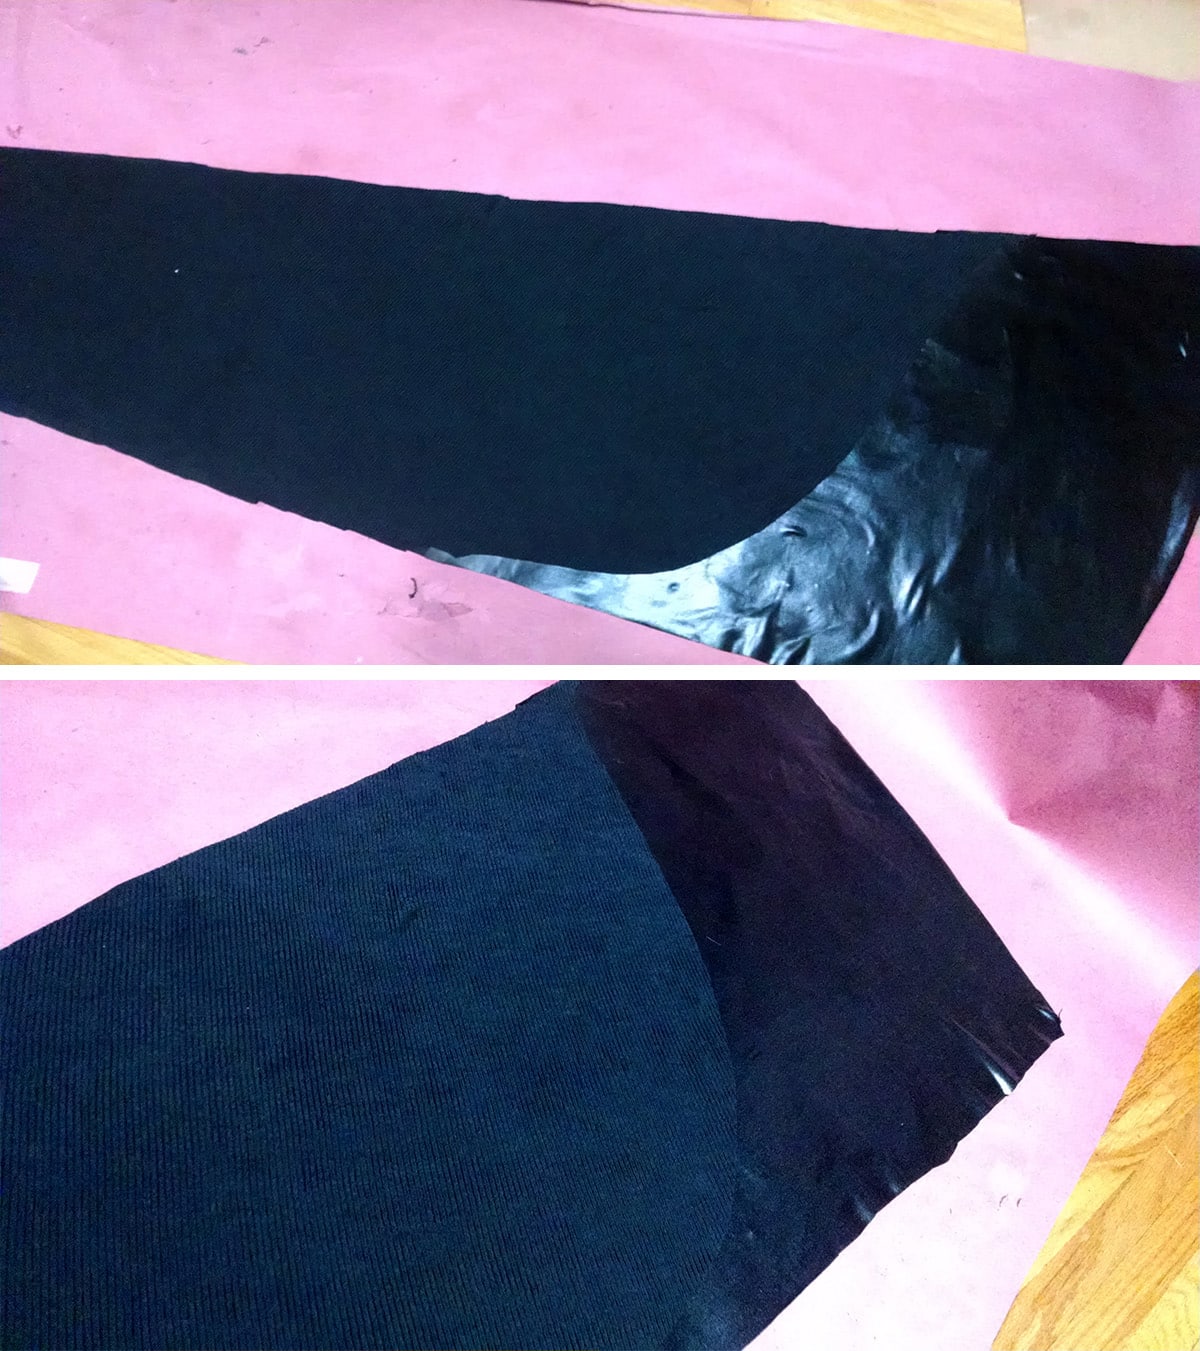 Long black pieces of textured fabric cut for Maleficent's overskirt.